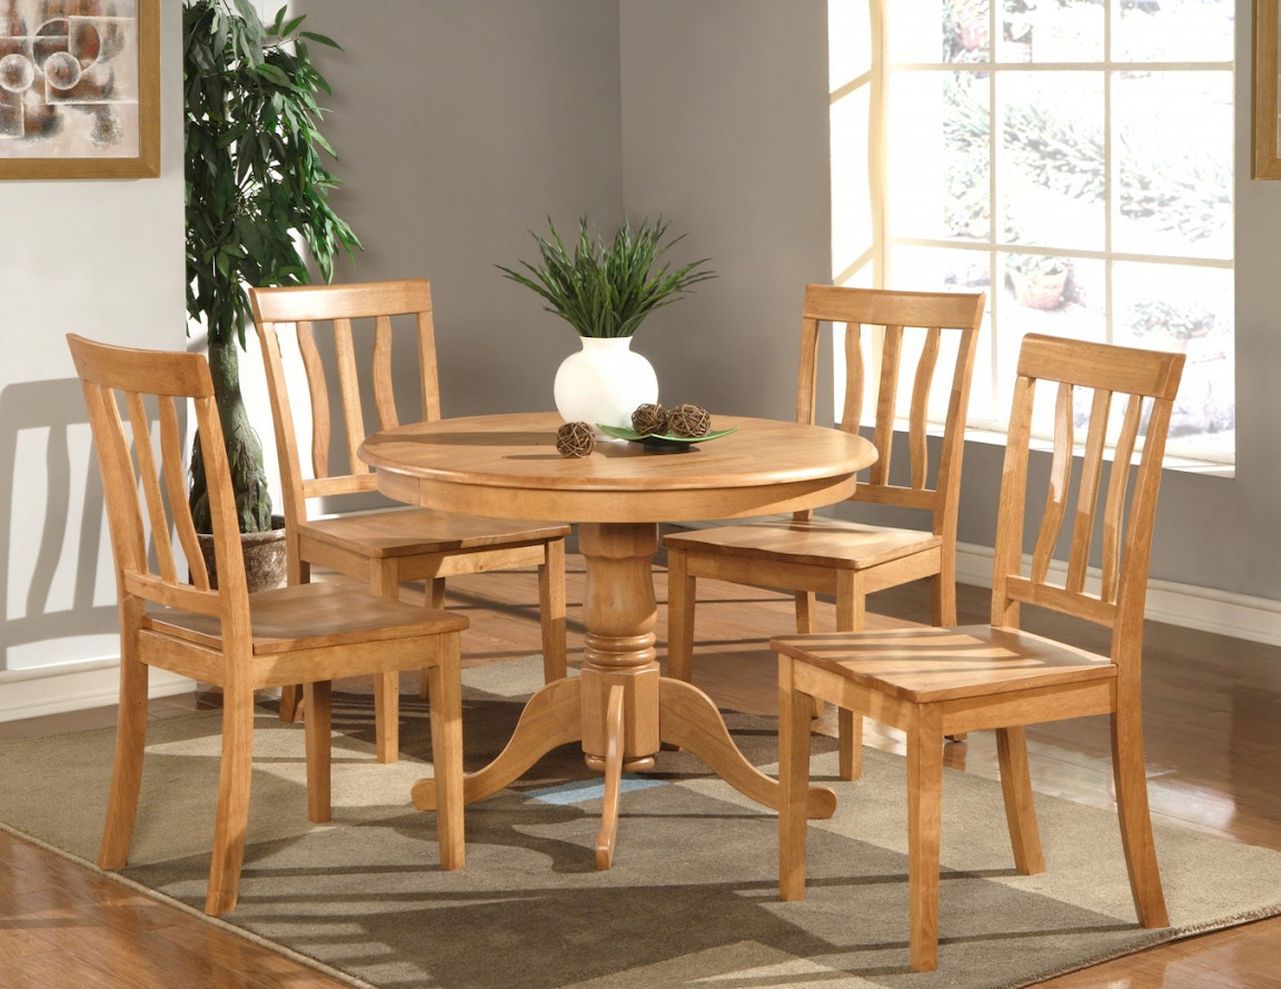 Round Kitchen Table And Chairs photo - 5